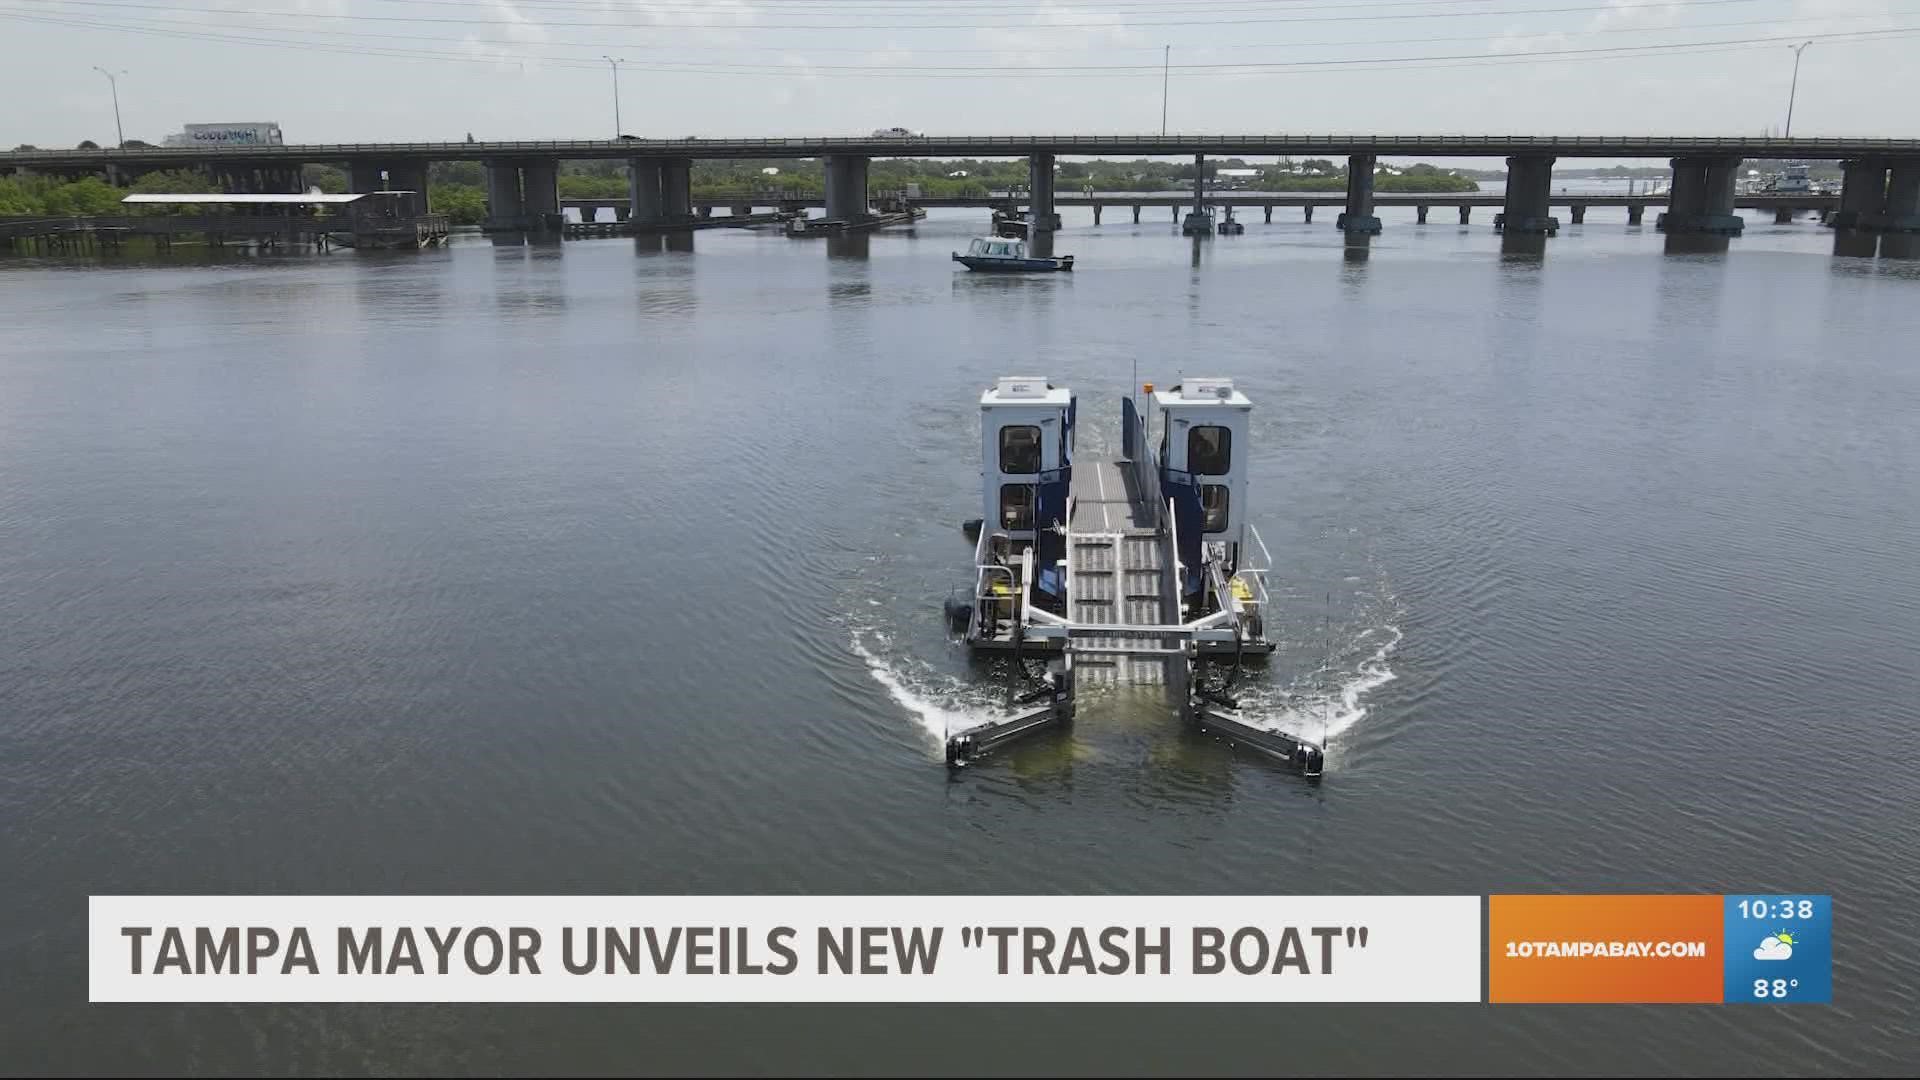 The City of Tampa unveils new trash boat